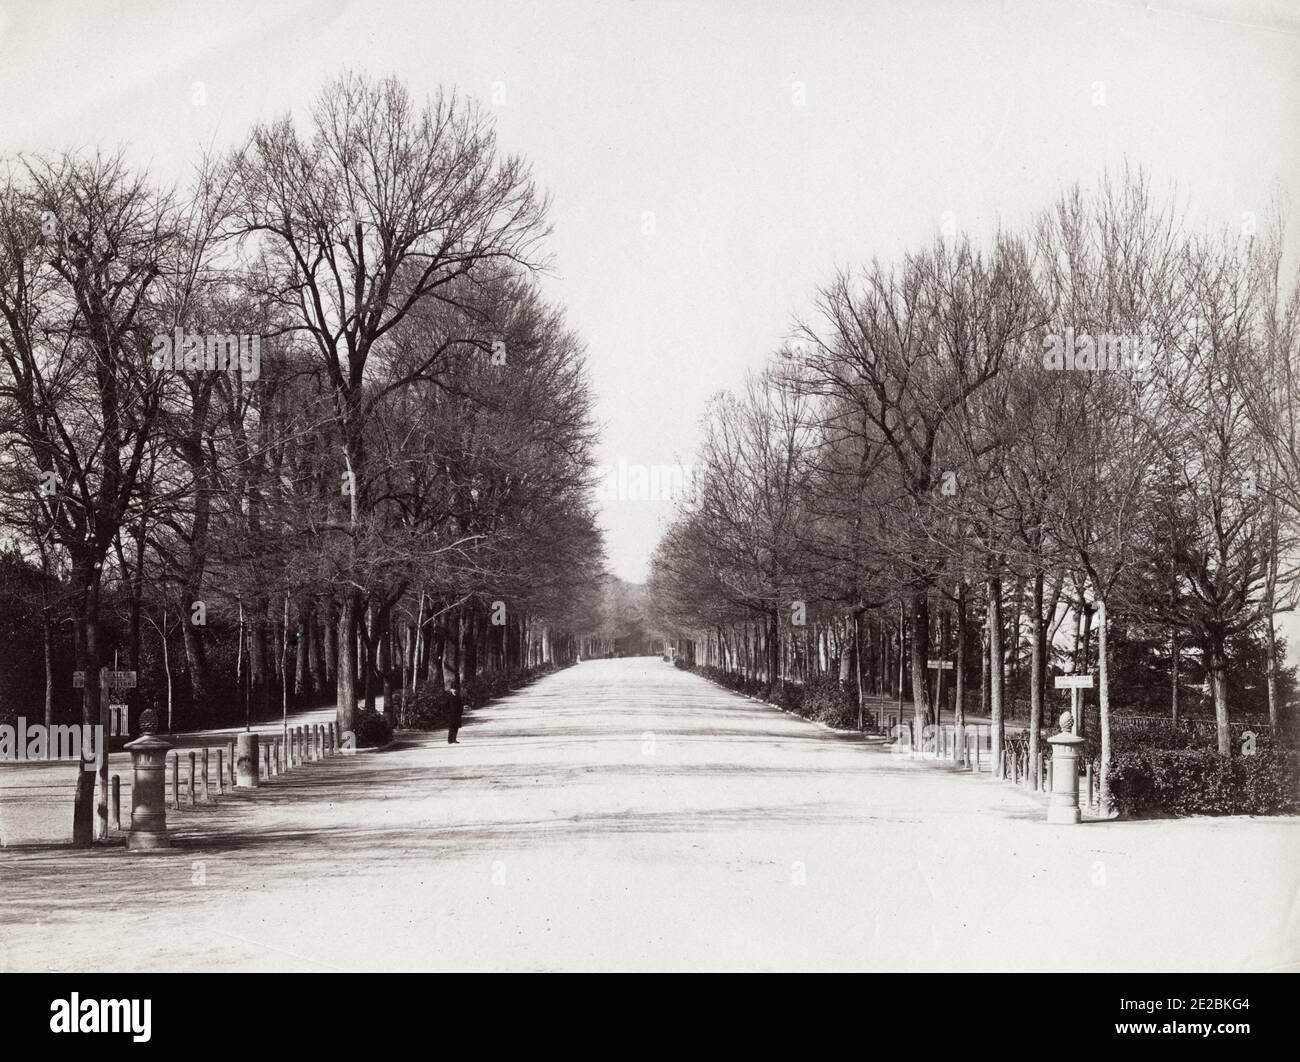 19th century vintage photograph: The Parco delle Cascine (Cascine Park) is a monumental and historical park in the city of Florence. The park covers an area of 160 hectares (395 acres). It has the shape of a long and narrow stripe, on the north bank of the Arno river, c.1890's. Stock Photo